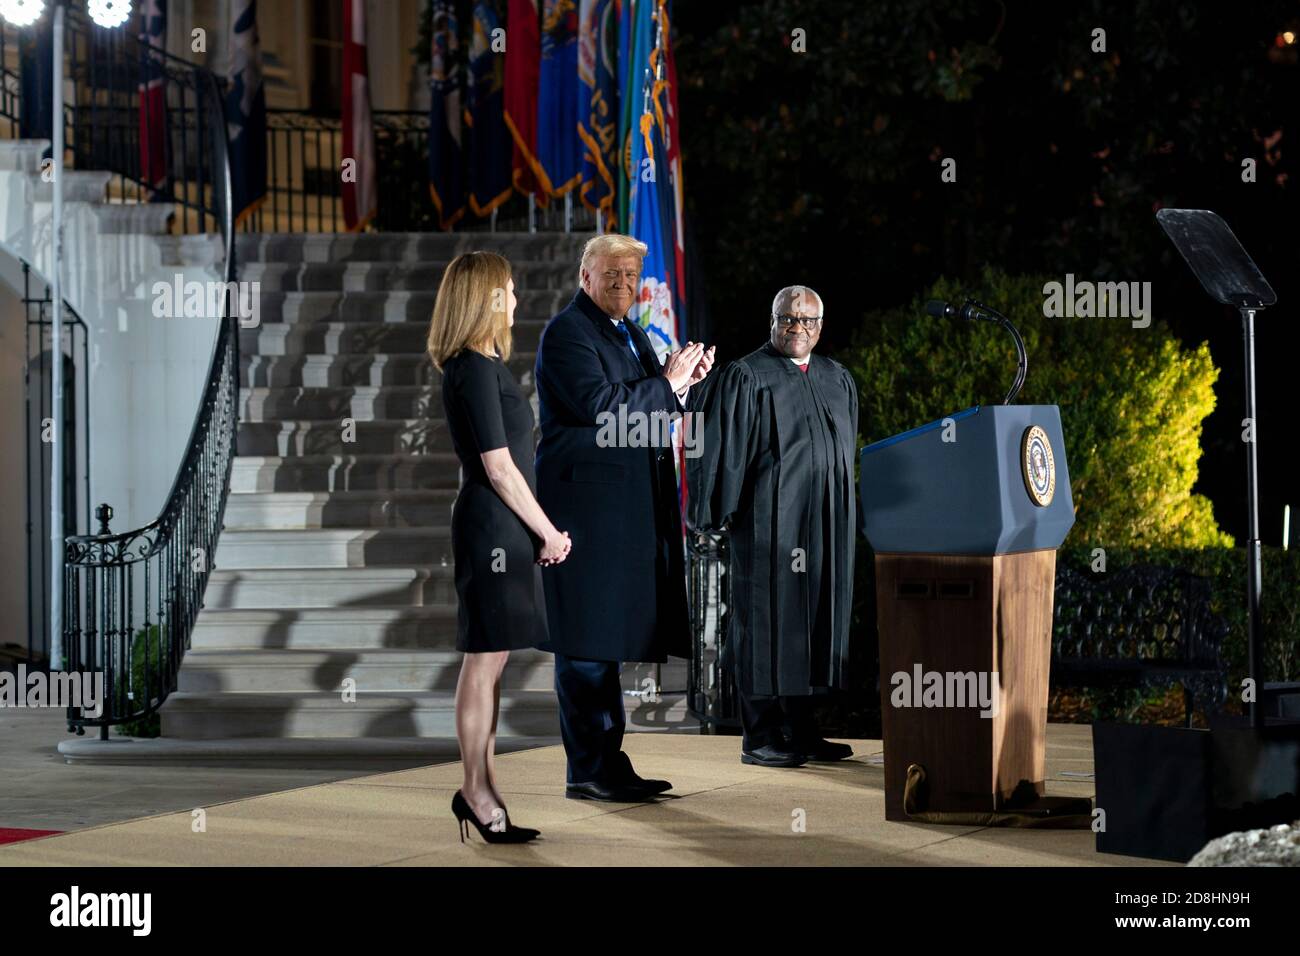 Supreme Court Associate Justice Amy Coney Barrett during her swearing in ceremony on the South Lawn of the White House October 26, 2020 in Washington, DC. Joining Barrett onstage are President Donald Trump and Supreme Court Associate Justice Clarence Thomas. Stock Photo